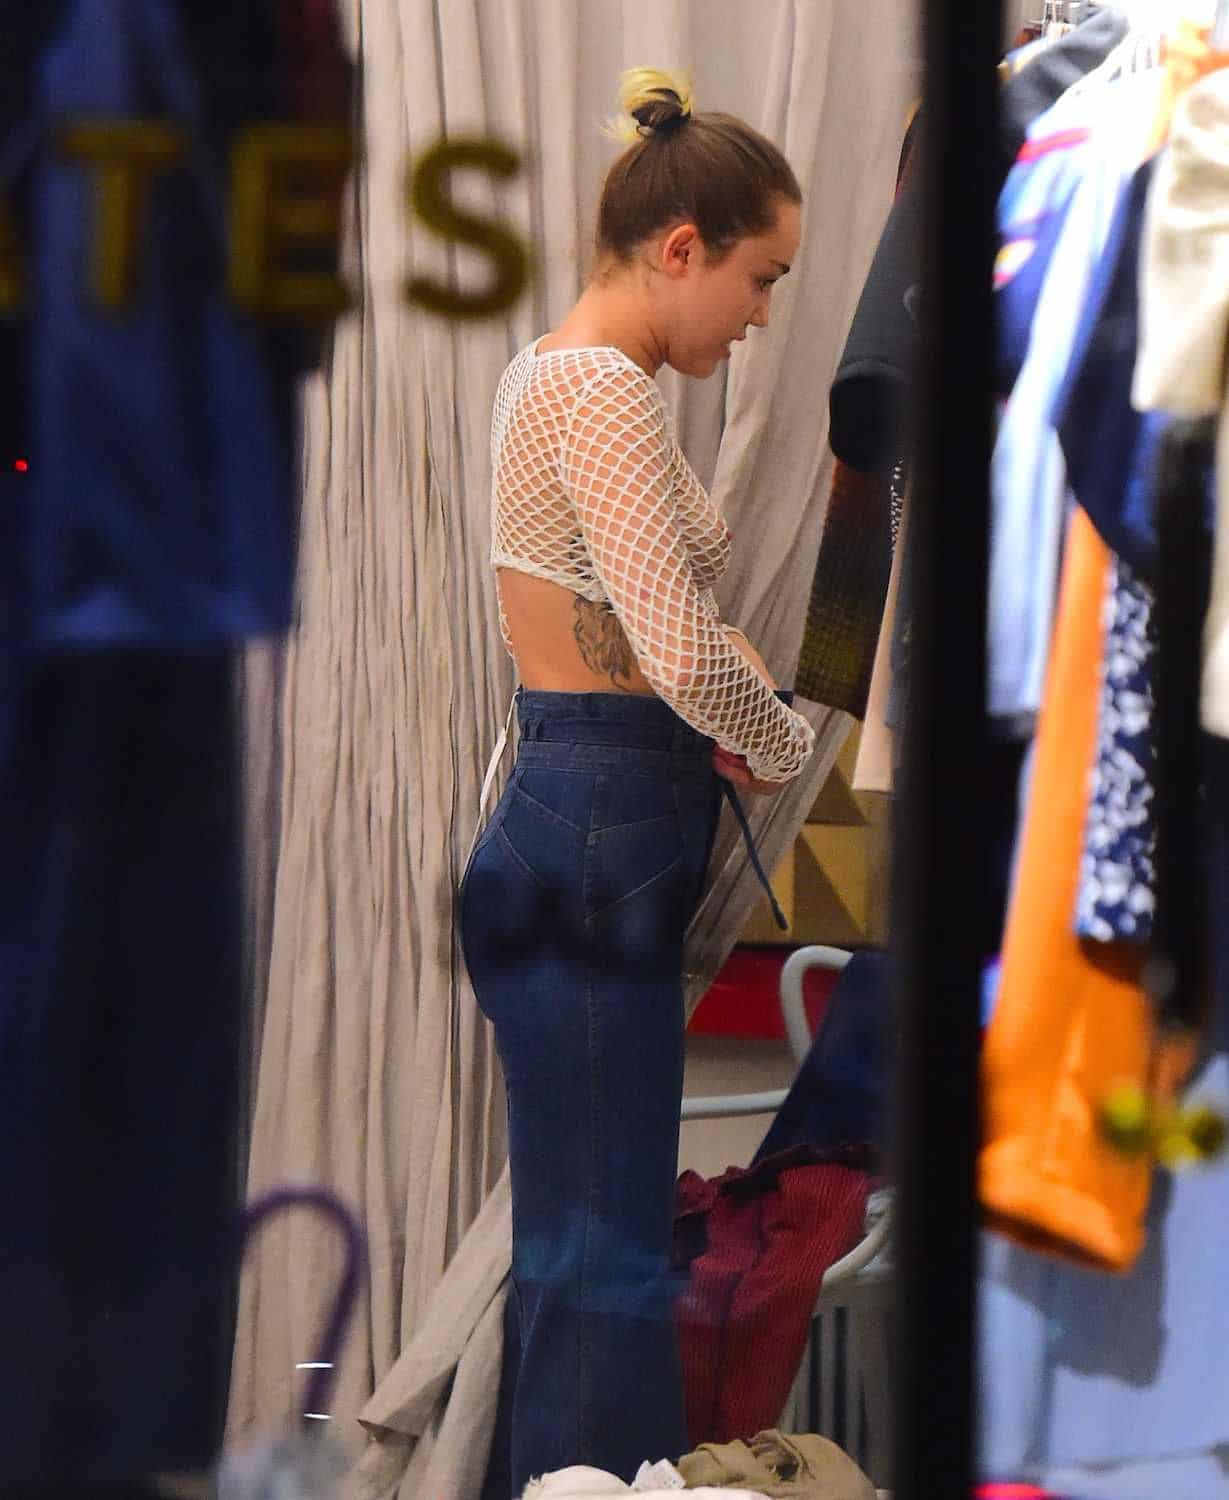 Miley Cyrus changing her clothes in a white mesh top